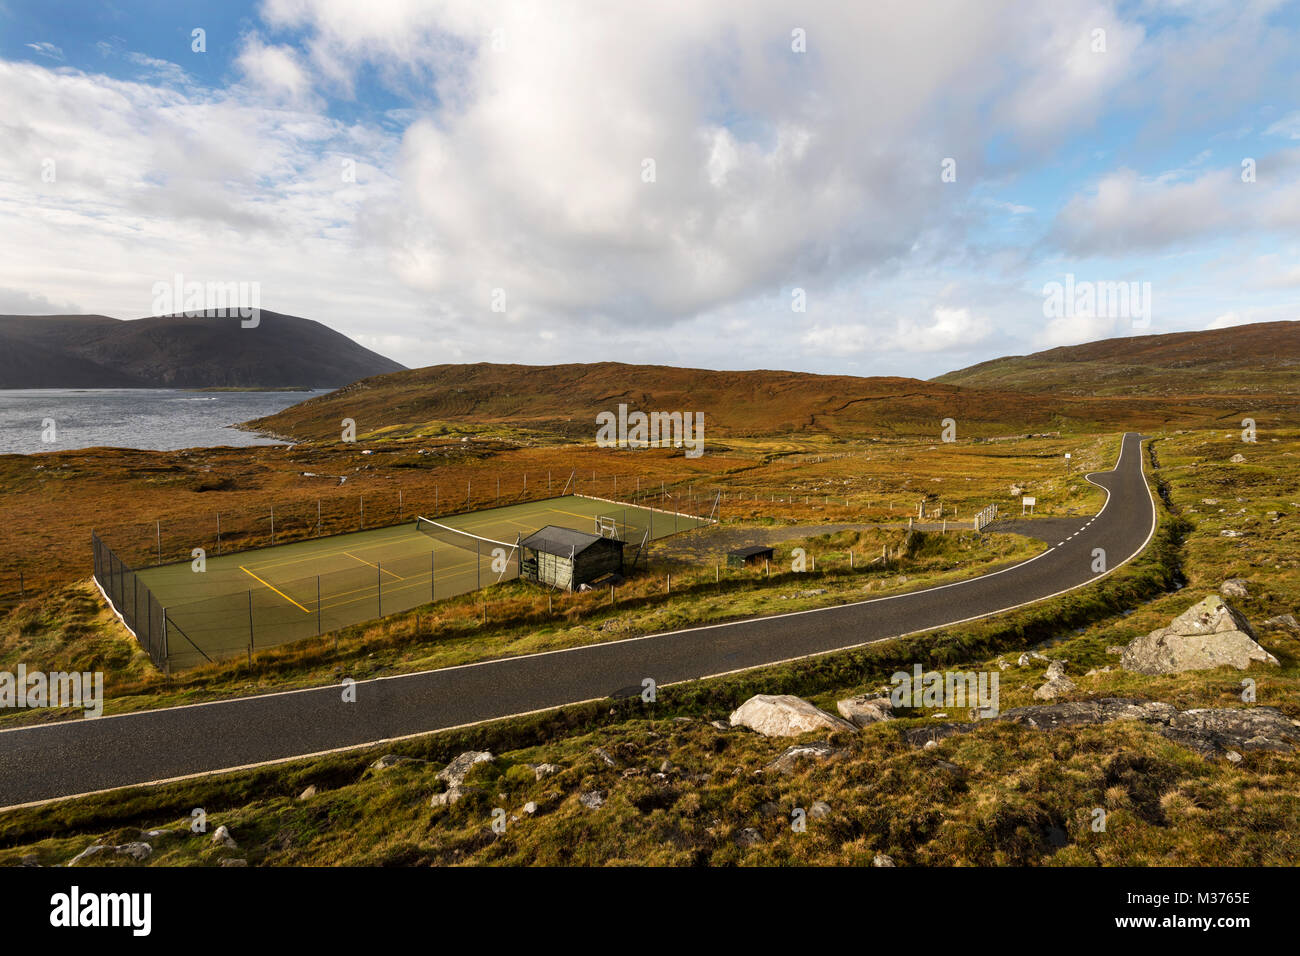 The Bunabhainneadar Tennis Court, the most remote tennis court in the British Isles.  Situated on the B887, road to Husinish, on the Isle of Harris. Stock Photo